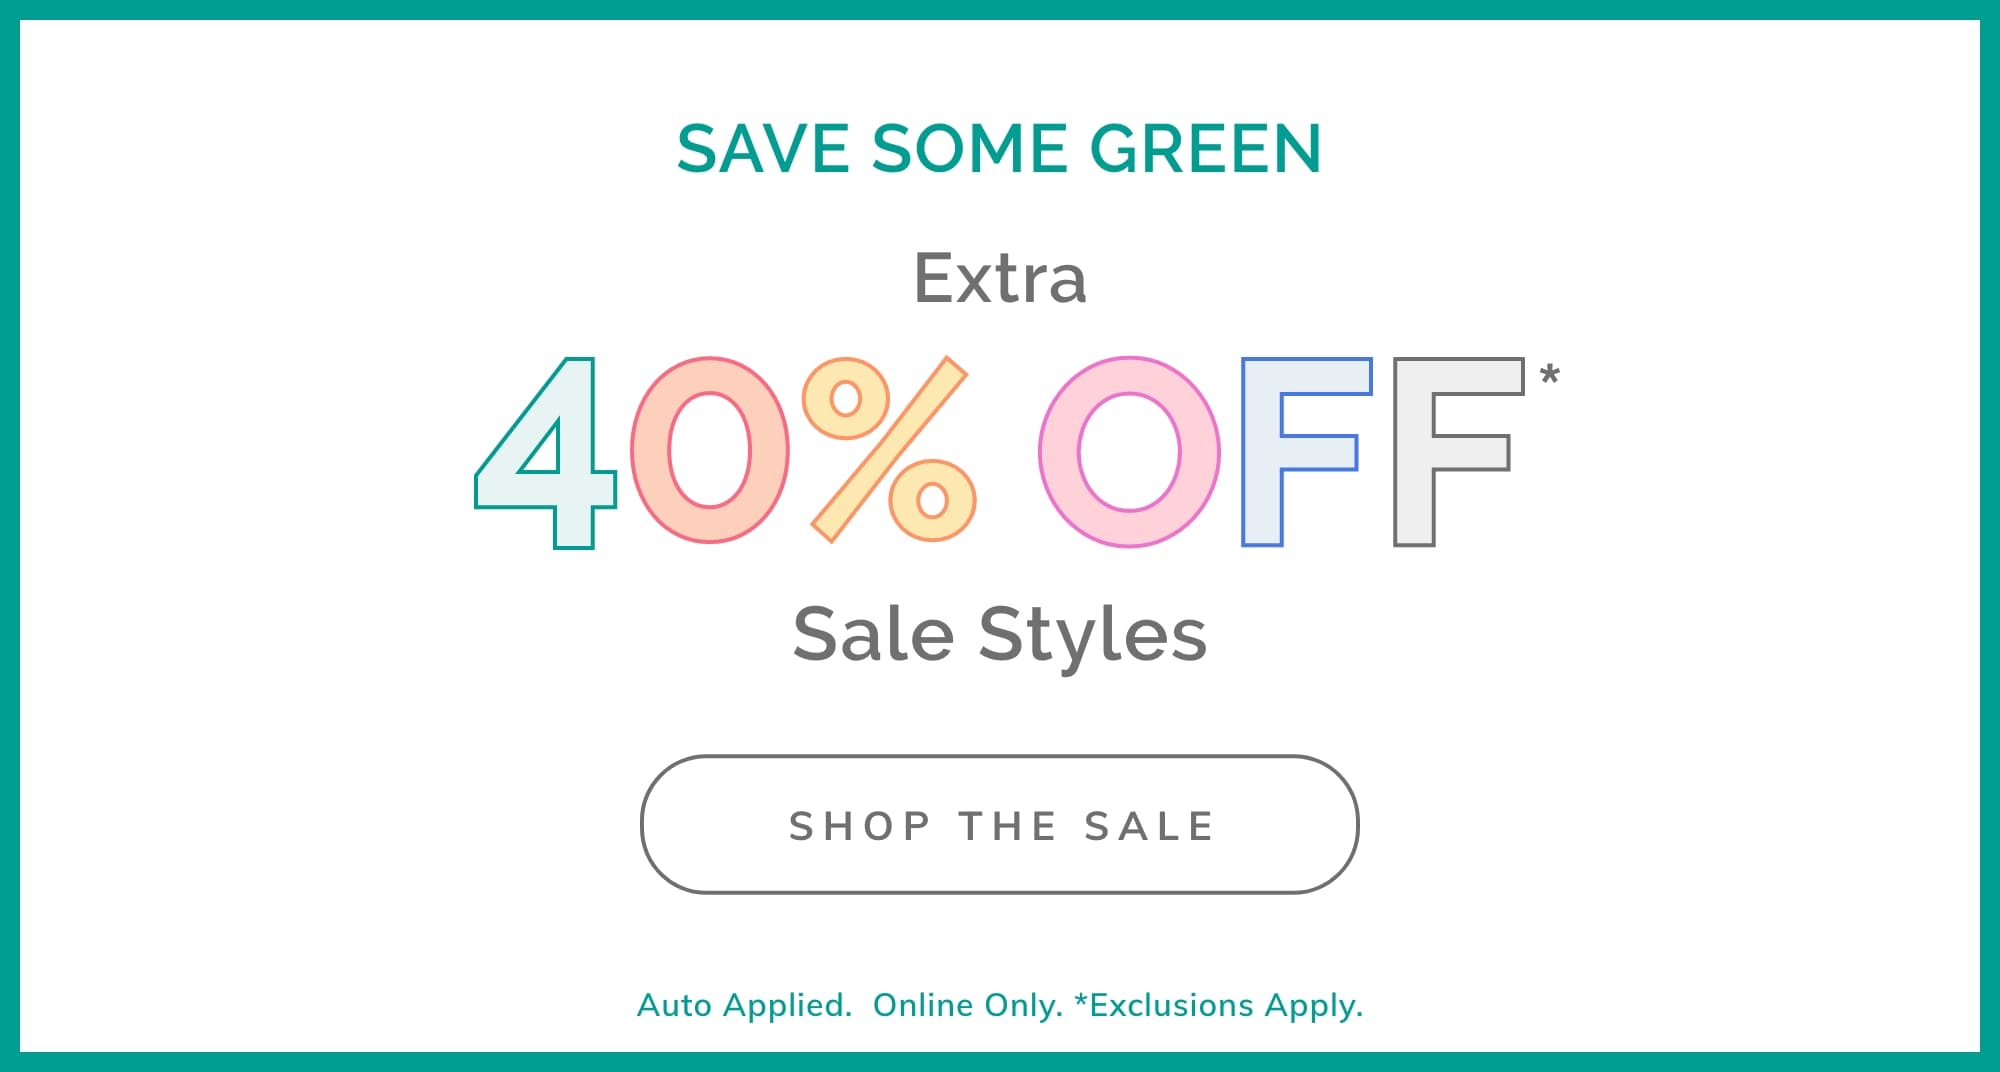 SAVE SOME GREEN EXTRA 40% OFF* SALE STYLES SHOP THE SALE Auto Applied.  Online Only. *Exclusions Apply.